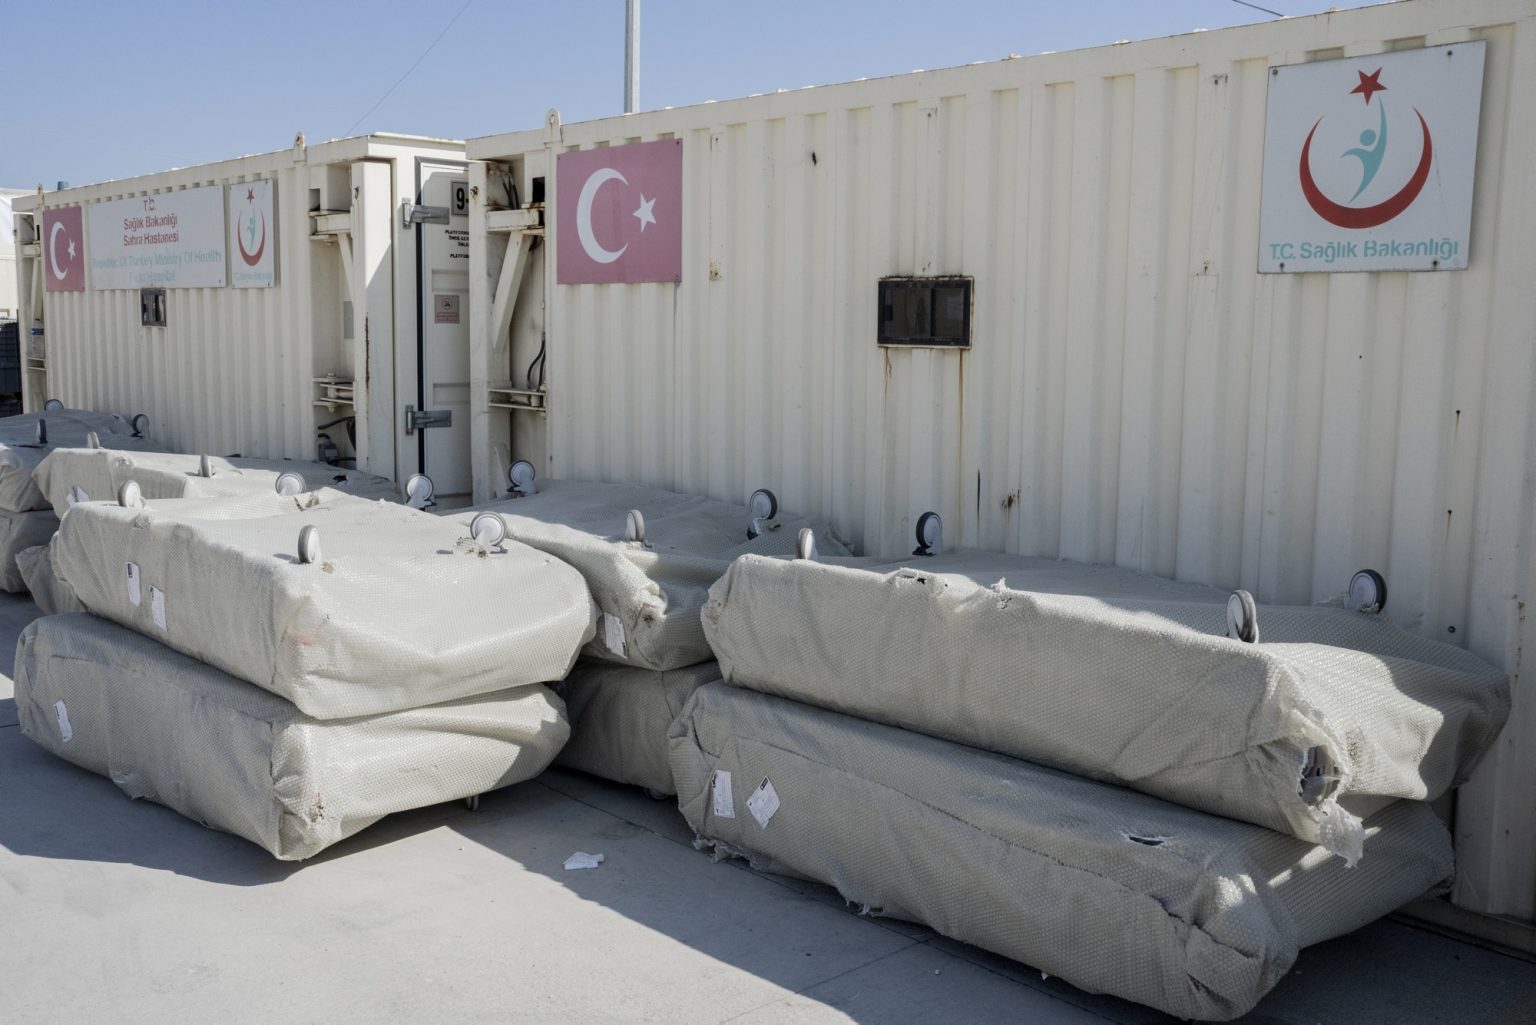 Antakya, Turkey, February 2023 - The aftermath of the earthquake that hit southern Turkey and northern Syria. Hospital beds piled up in the area of from the hospital camp being set up in the city of Antakya.><
Antakya, Turchia, febbraio 2023  Le conseguenze del terremoto che ha colpito la Turchia del Sud e la Siria del nord.